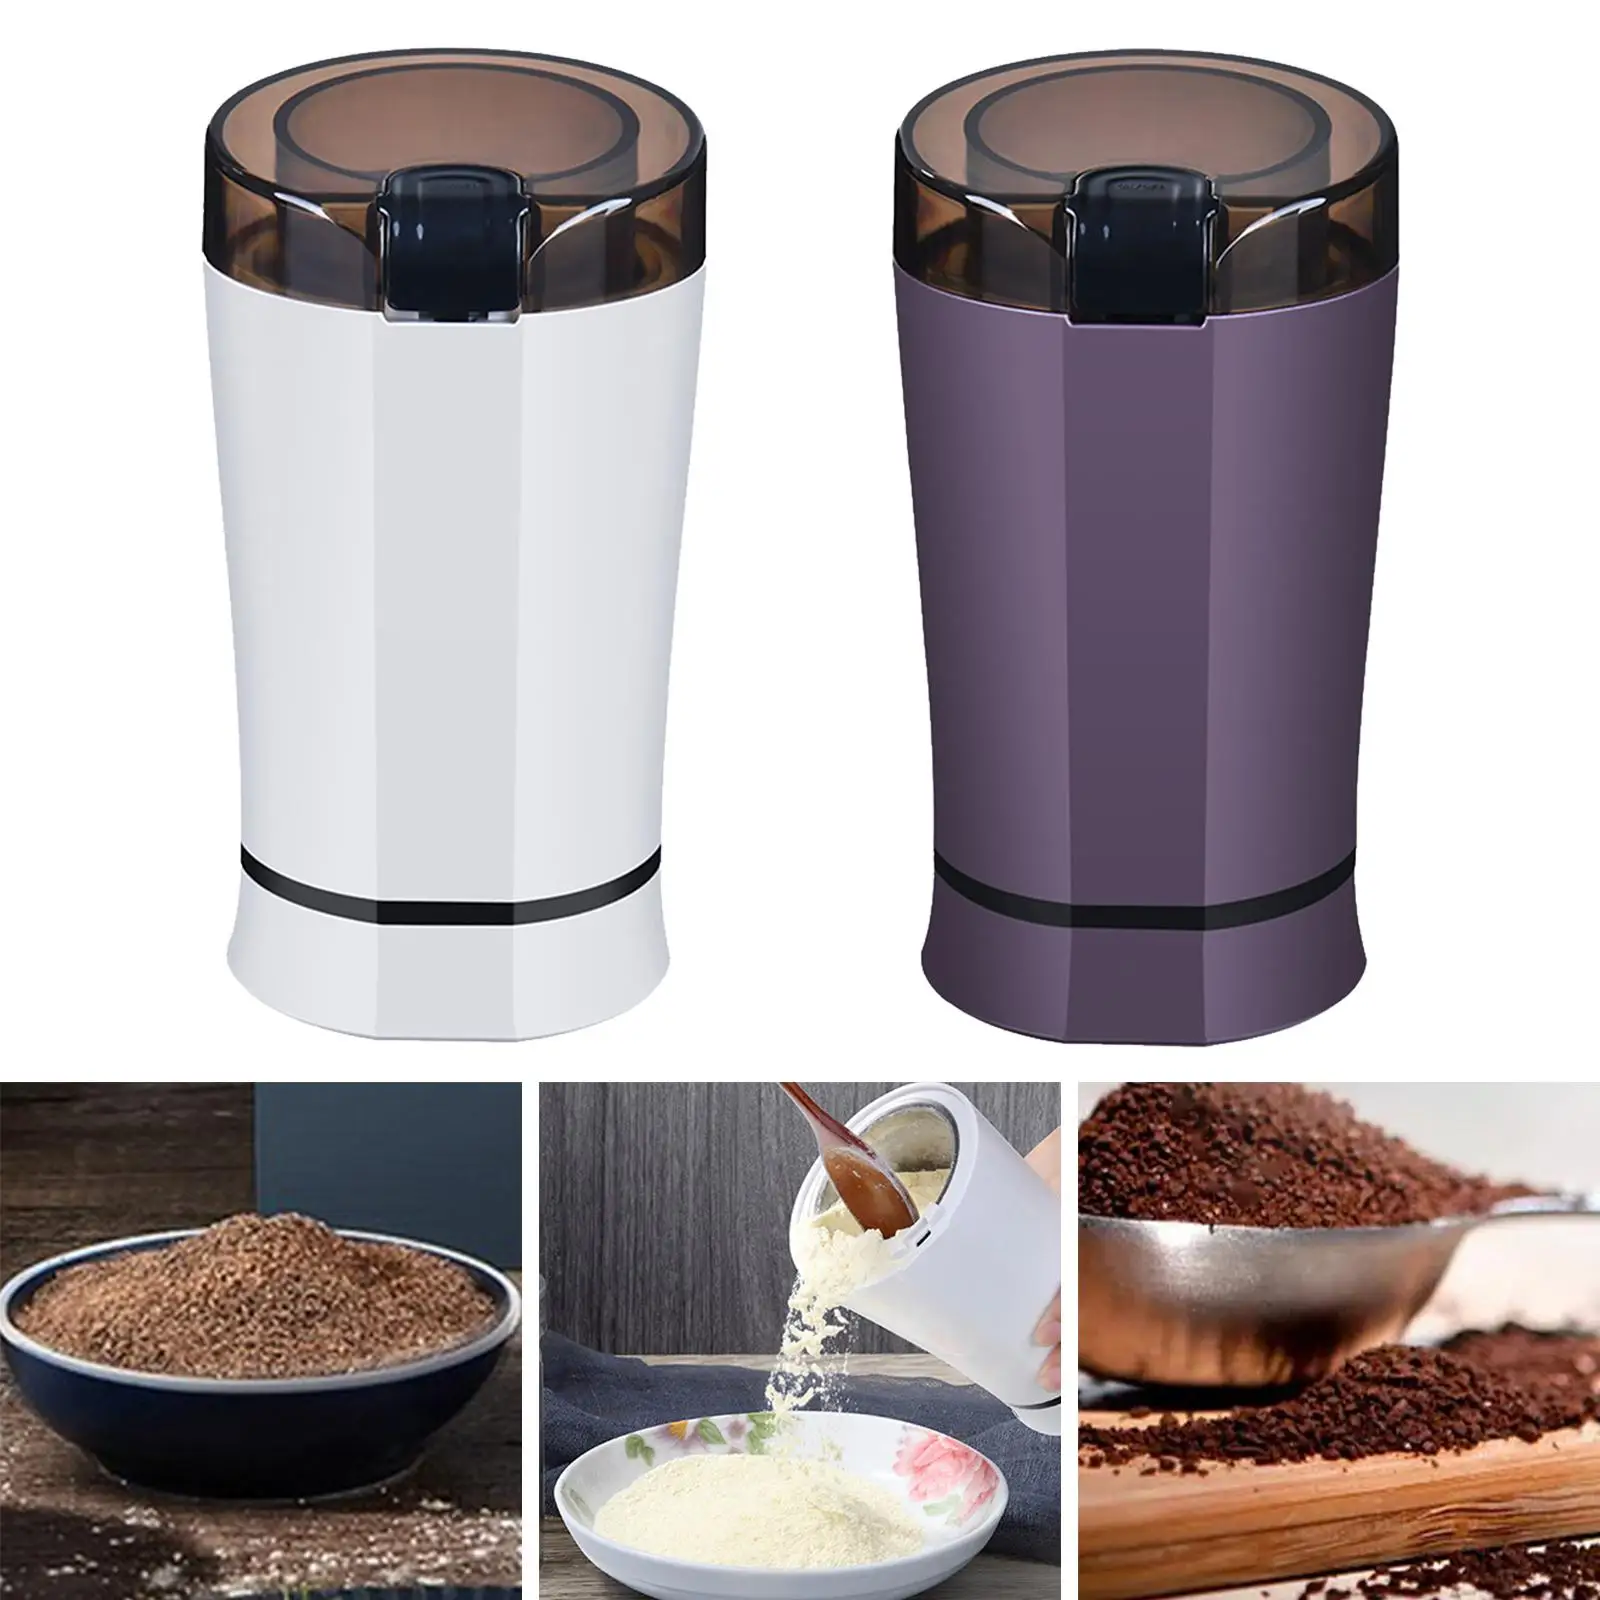 Electric Coffee Grinder Spices, Herbs, Nuts, Grains Blender with Brush Grinder Bean Burr Mill